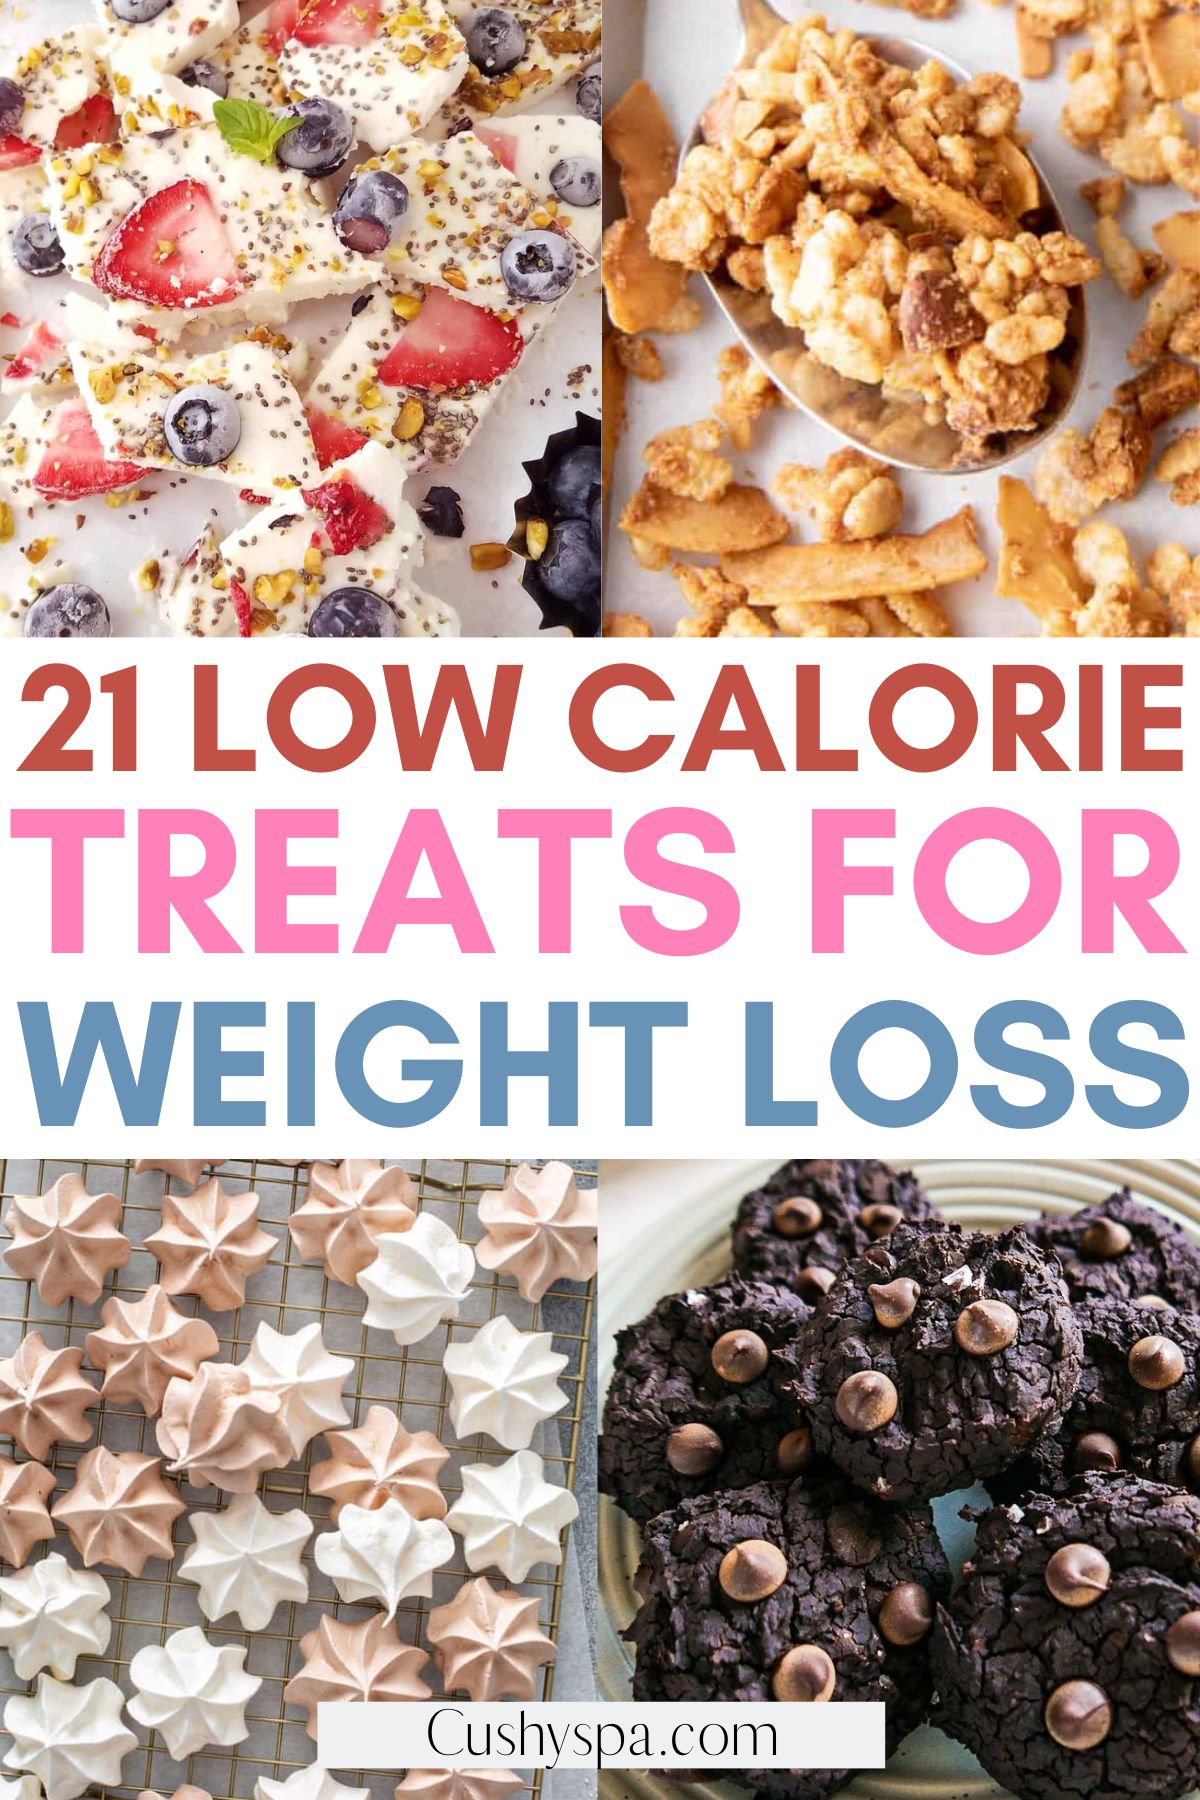 Low Calorie Treats for Weight Loss